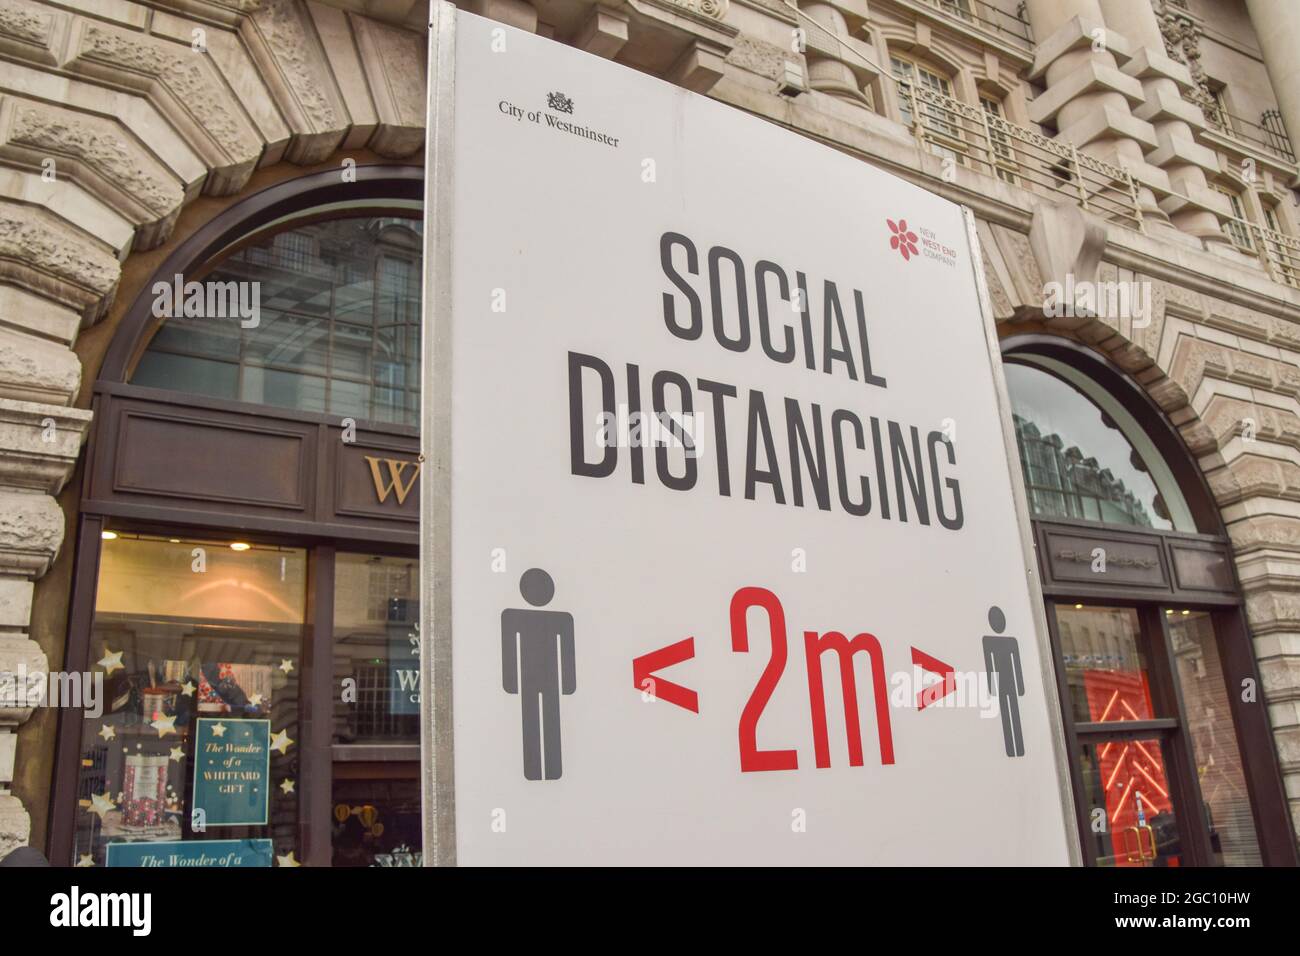 Detail of a social distancing sign on Regent Street during the coronavirus pandemic. London, United Kingdom 2021. Stock Photo